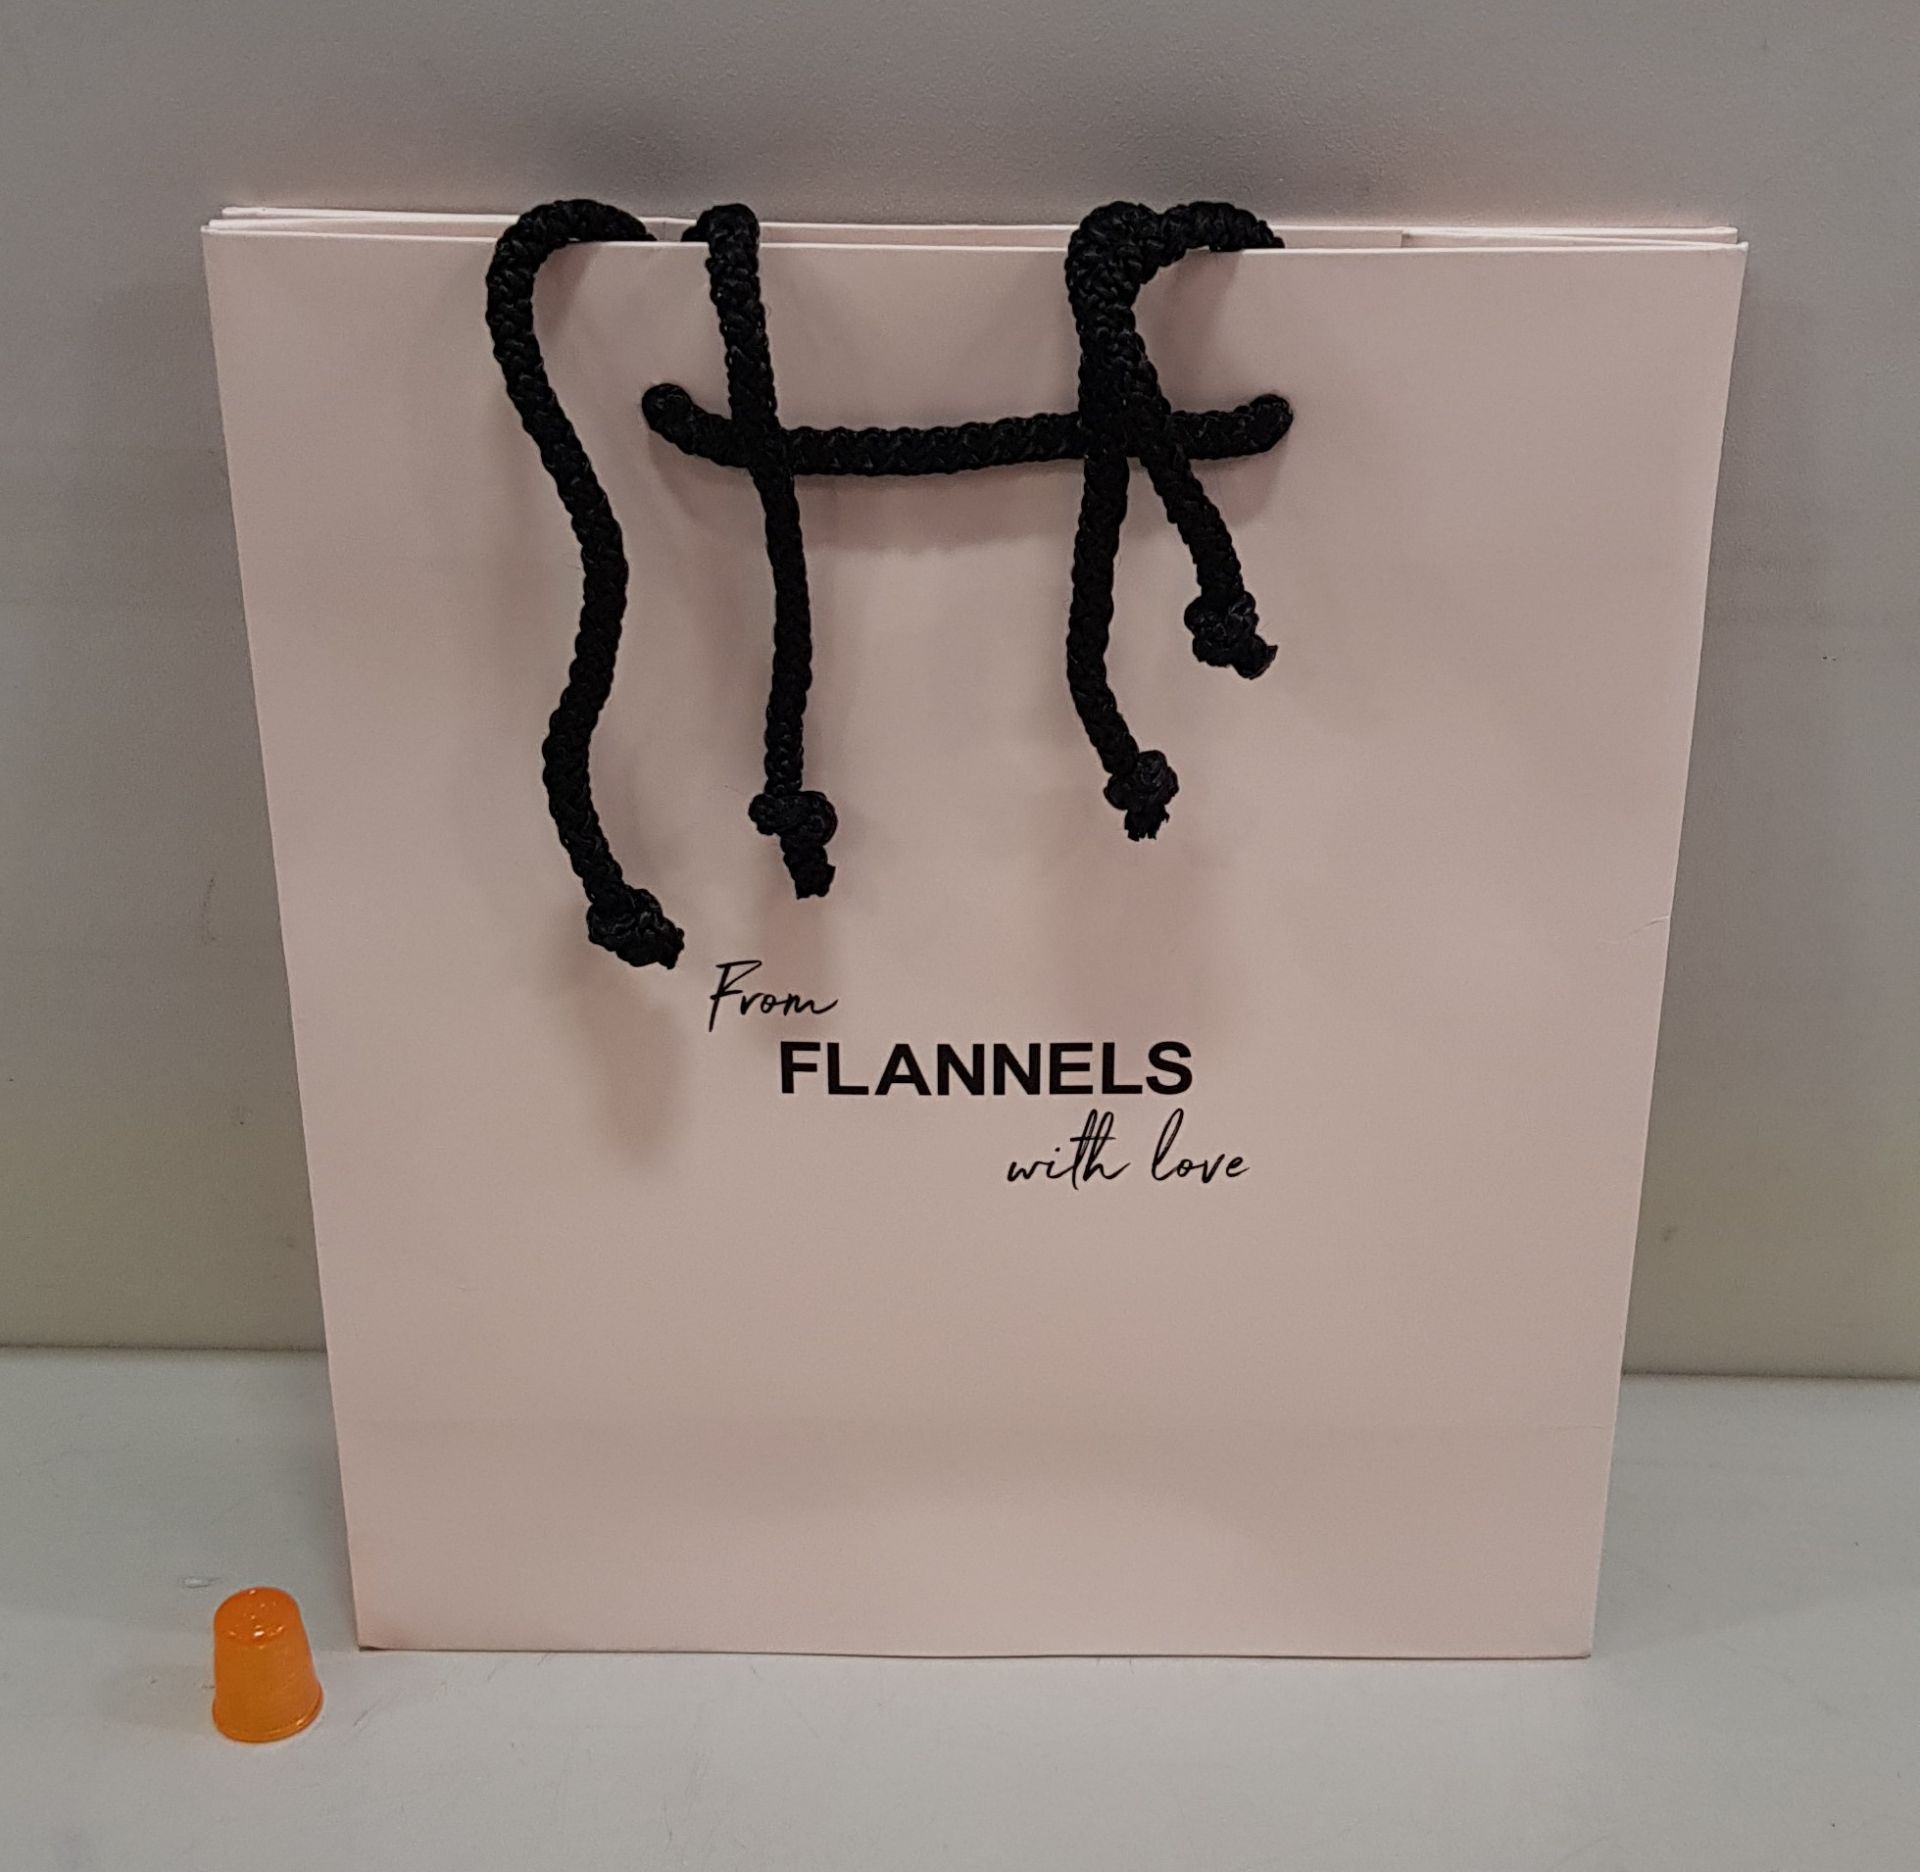 600 X BRAND NEW FLANNELS GIFT BAGS (FROM FLANNELS WITH LOVE) SIZE 22CM X 25CM IN 3 BOXES